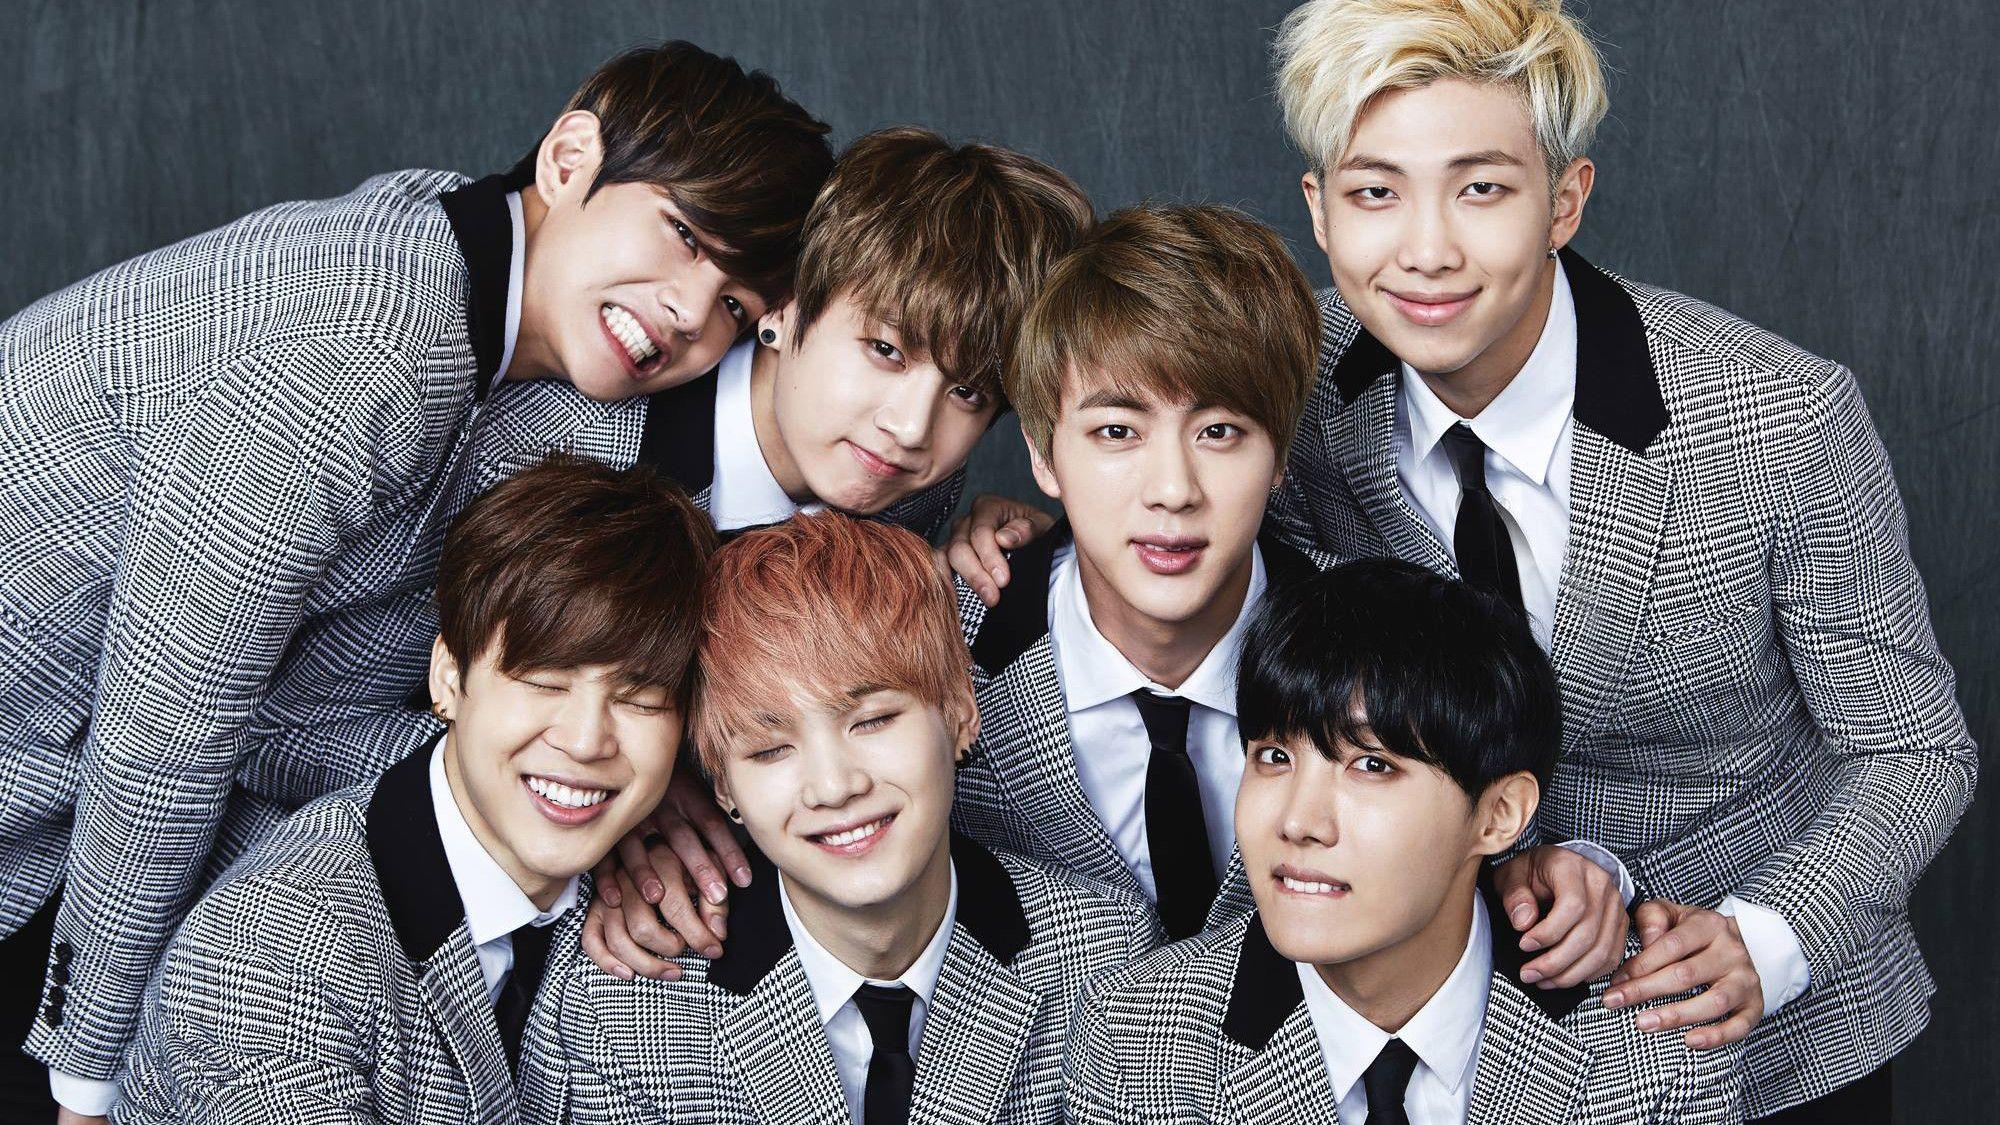 130613  can you do bts ot7 desktop wallpapers  or hd